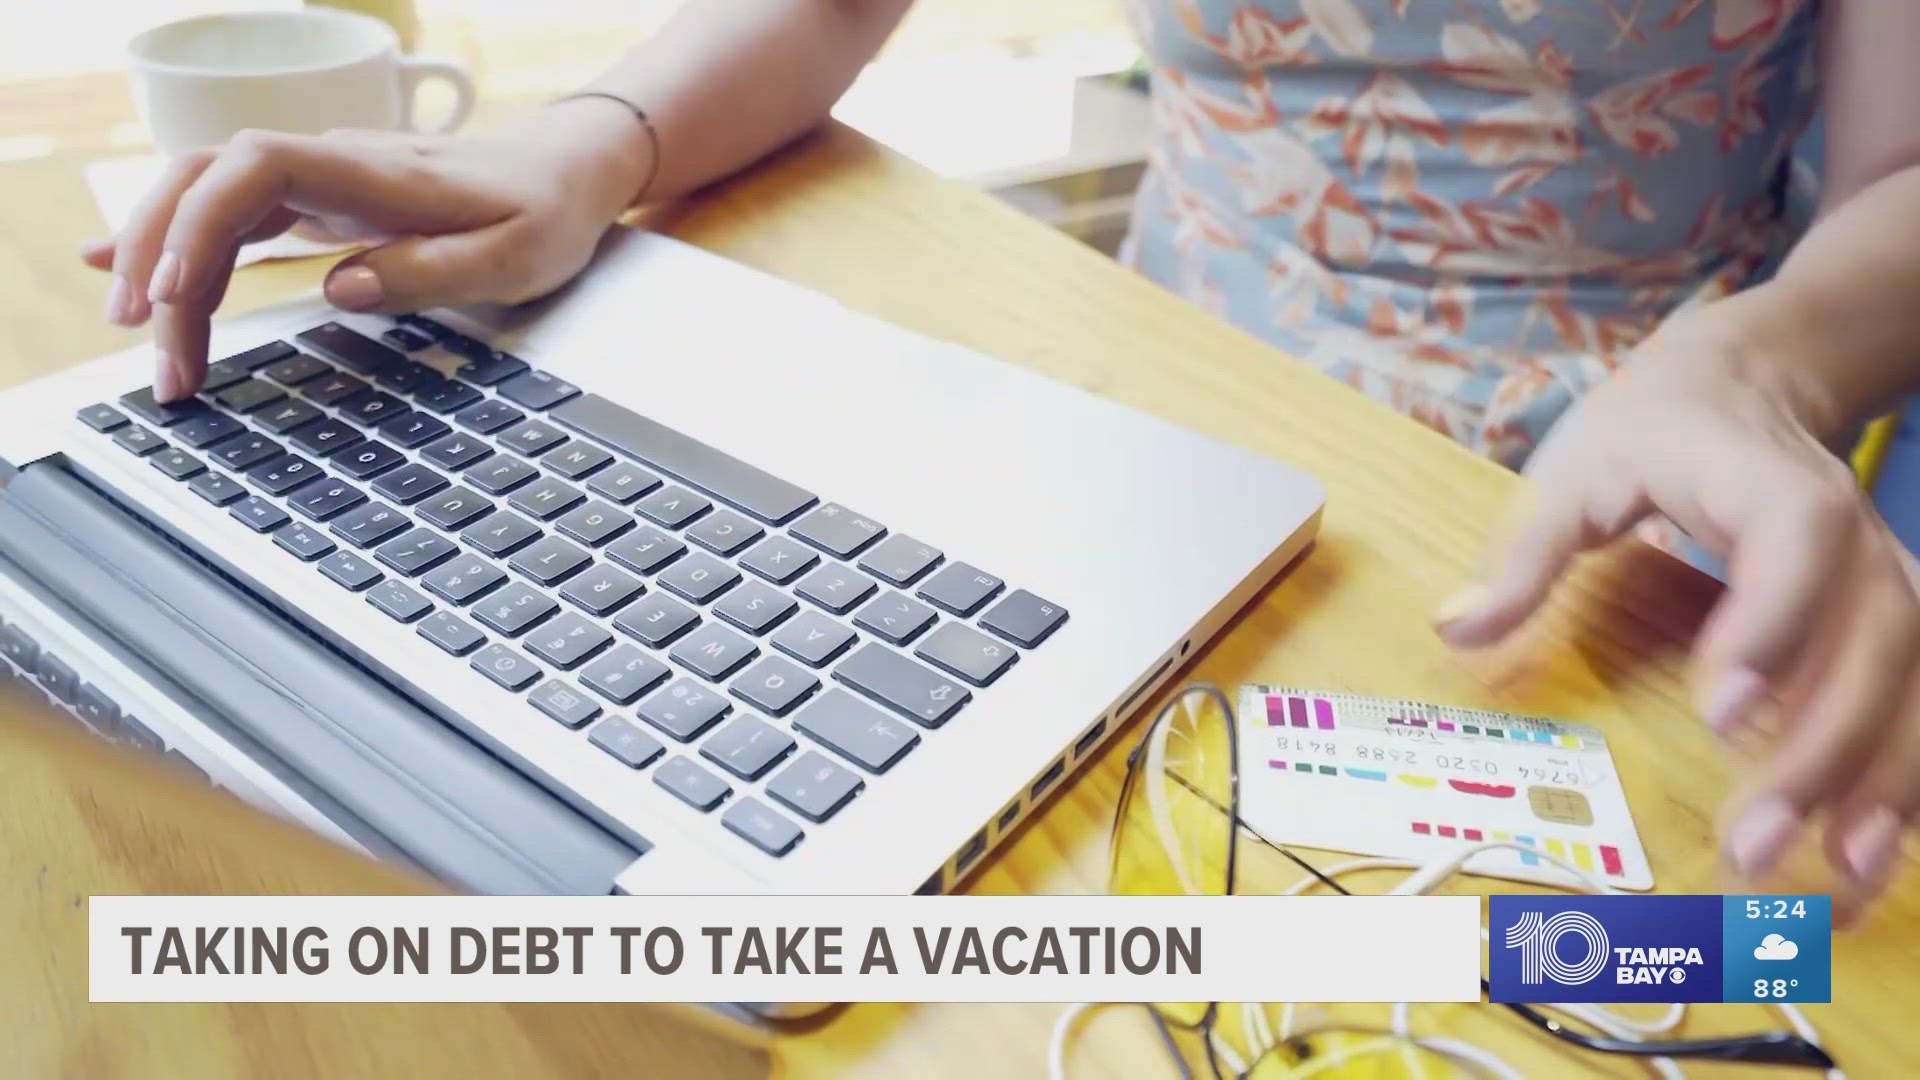 According to a new survey from Bankrate, more than 1 in 3 people are willing to go into debt to pay for vacation.